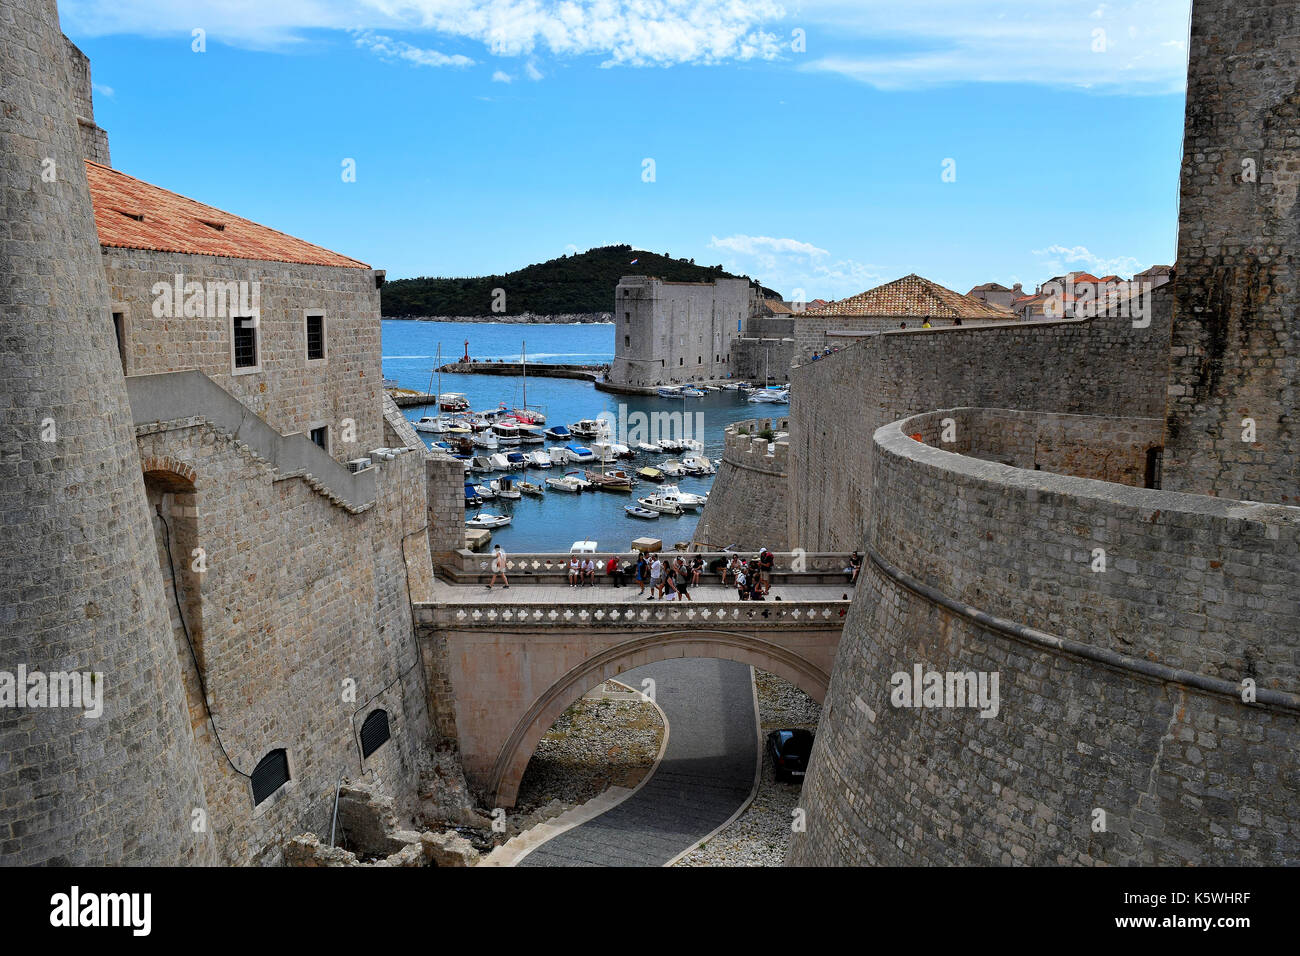 Ploce Gate of Dubrovnik old city, Game of Thrones filming location Stock Photo